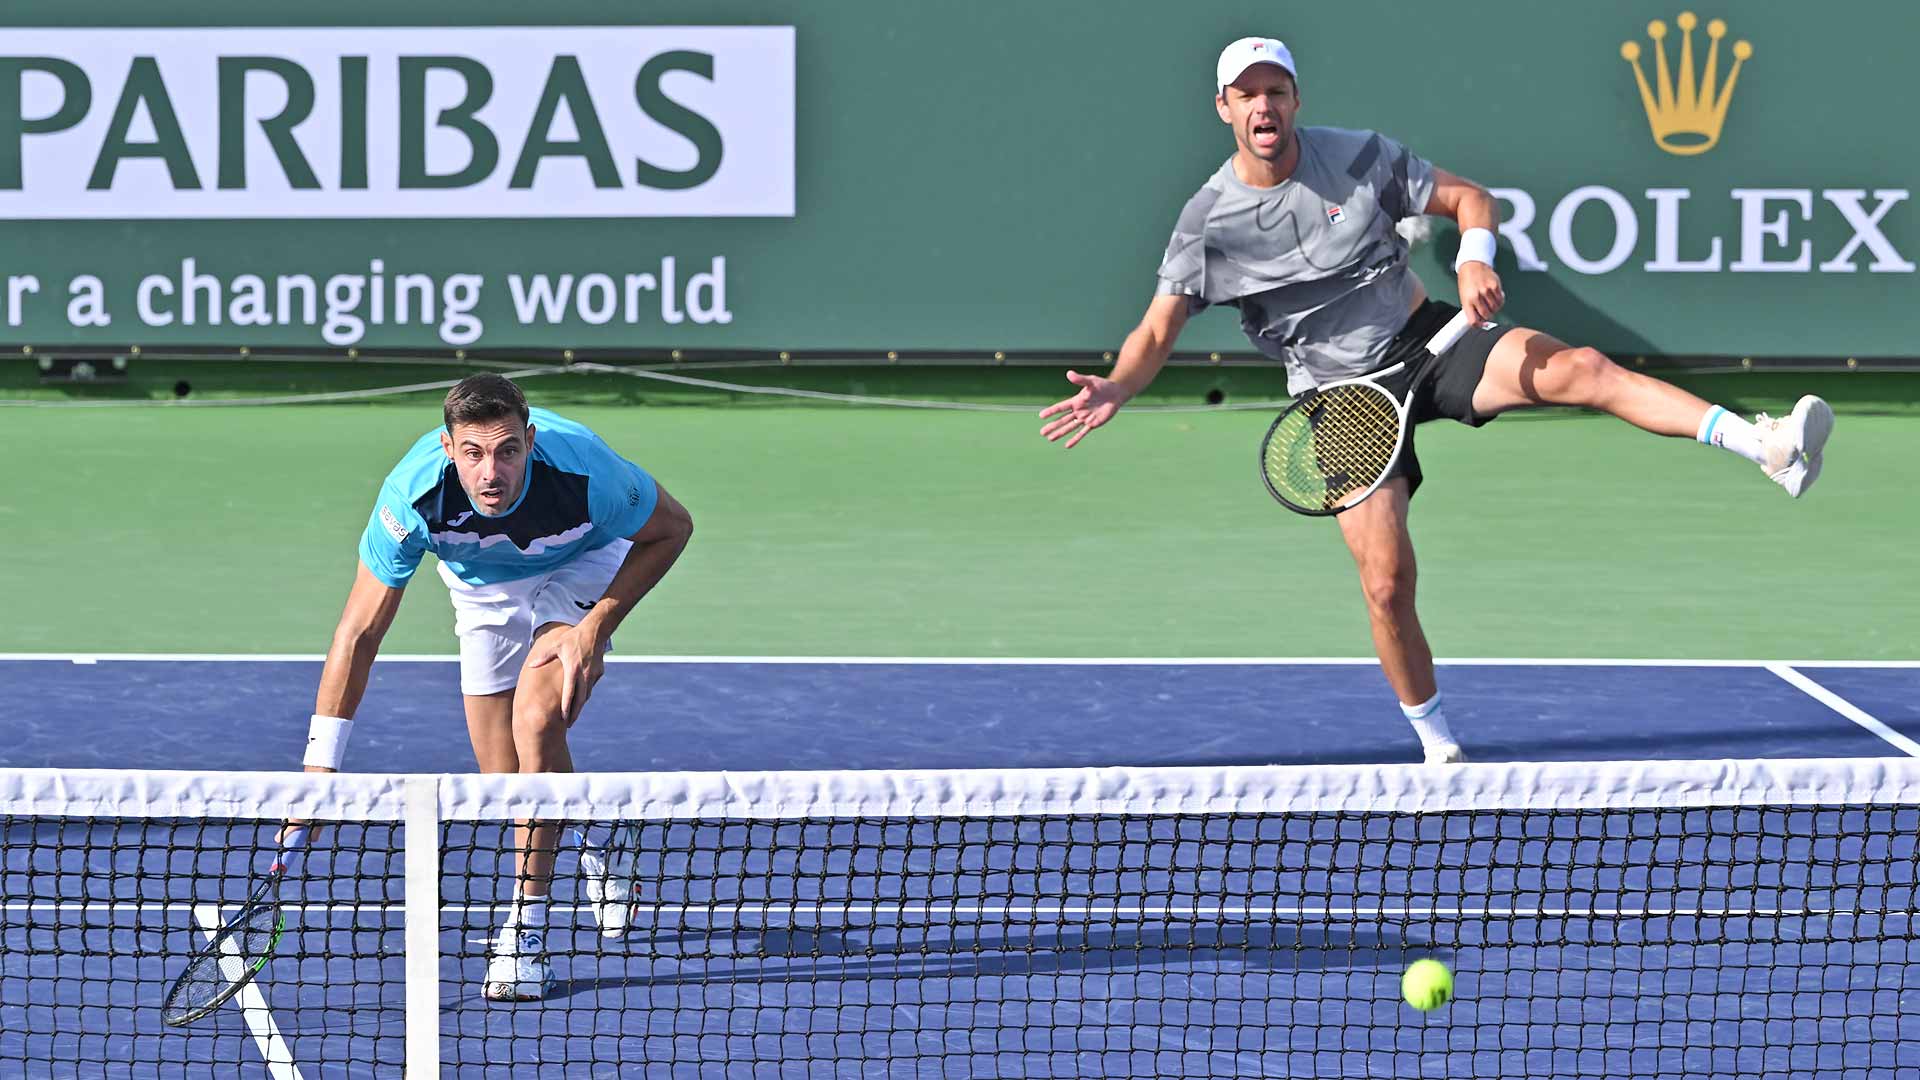 Marcel Granollers and Horacio Zeballos are chasing their sixth ATP Masters 1000 crown as a team at the BNP Paribas Open.